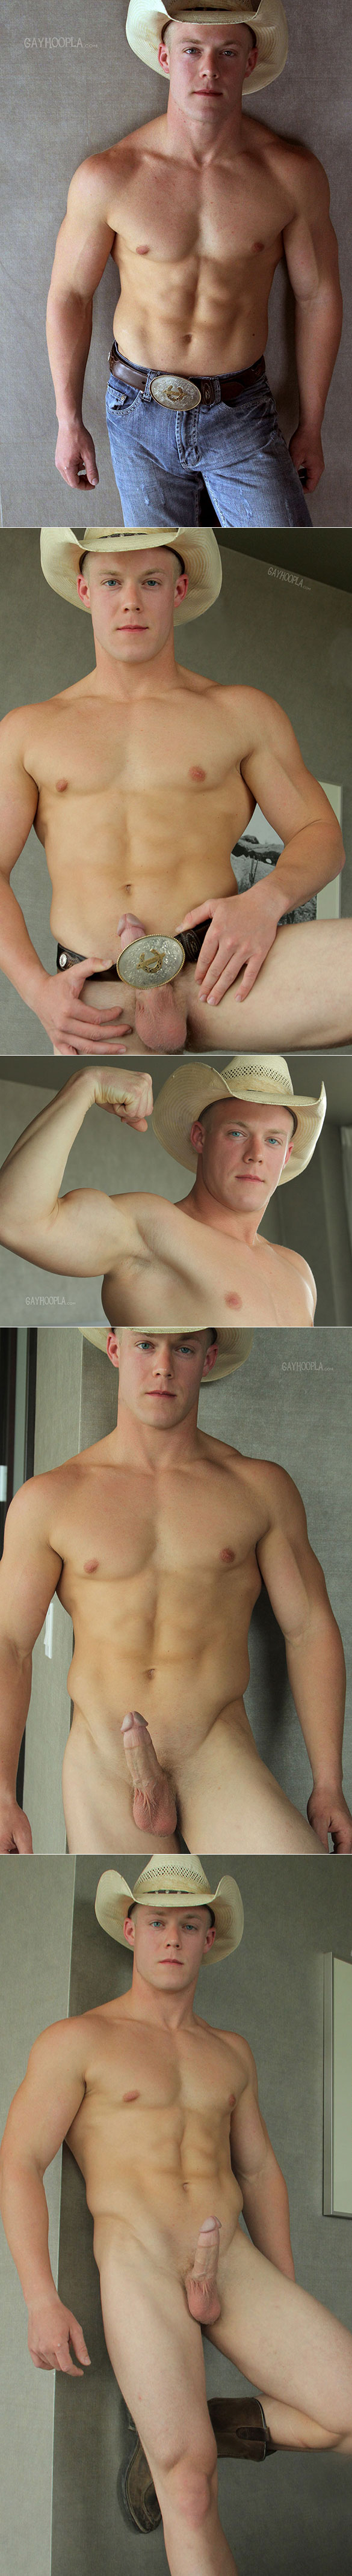 GayHoopla: Colt McLaire busts a nut